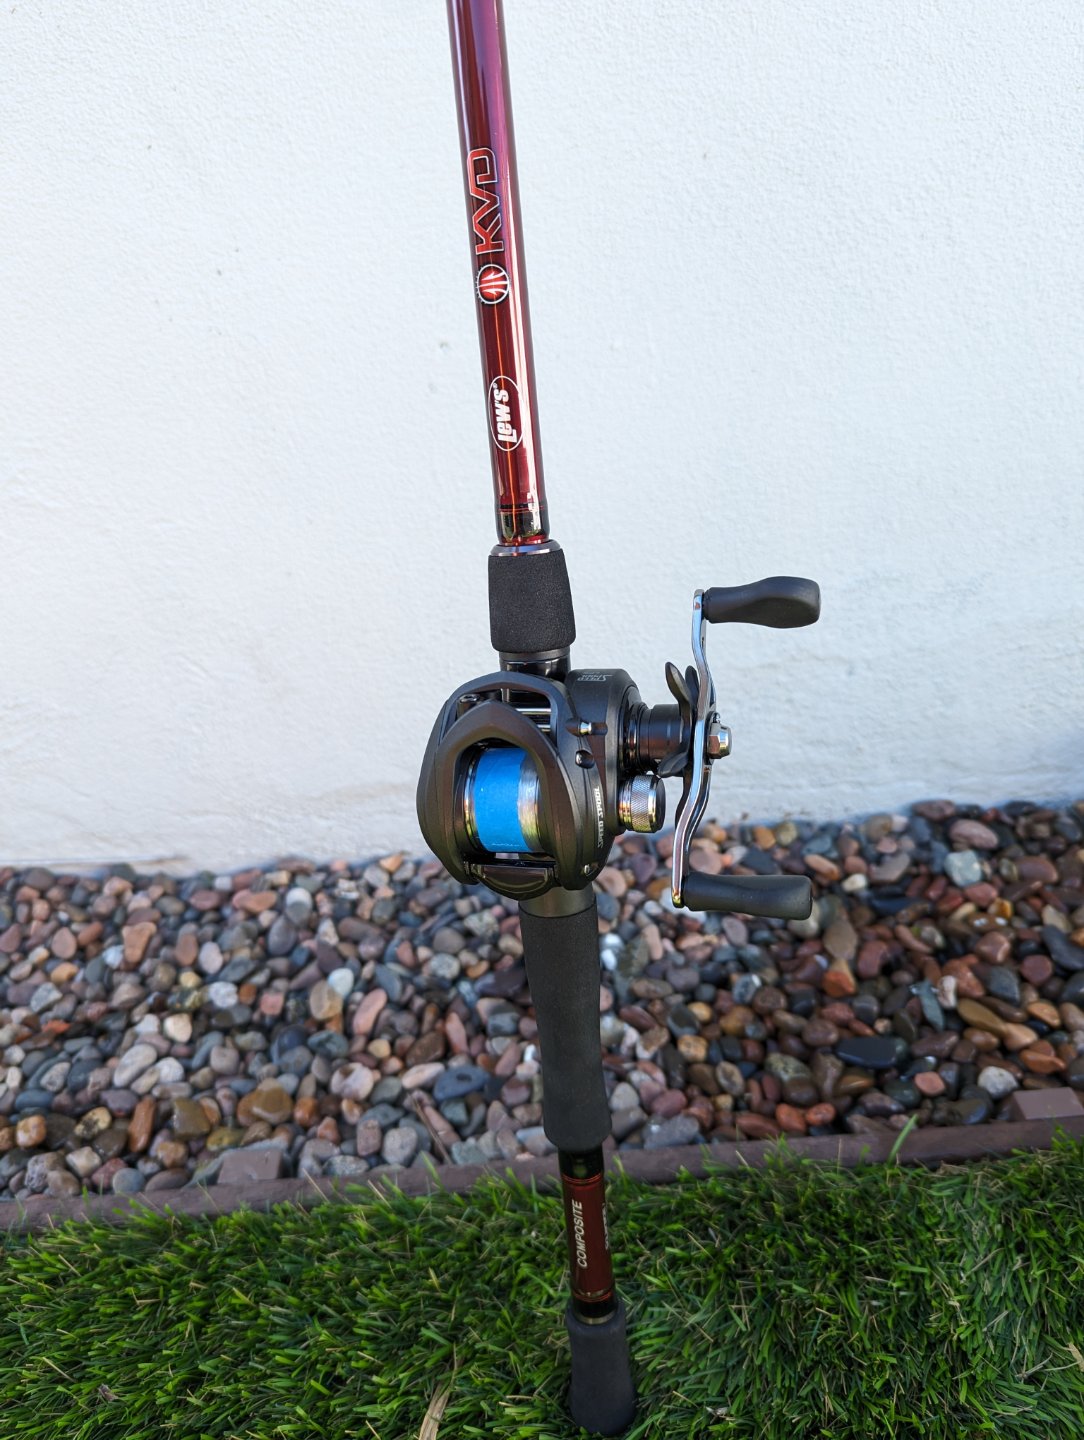 FS - rods & combos galore - bass, bay, inshore, trout - San Diego & SoCal  Fishing Forums